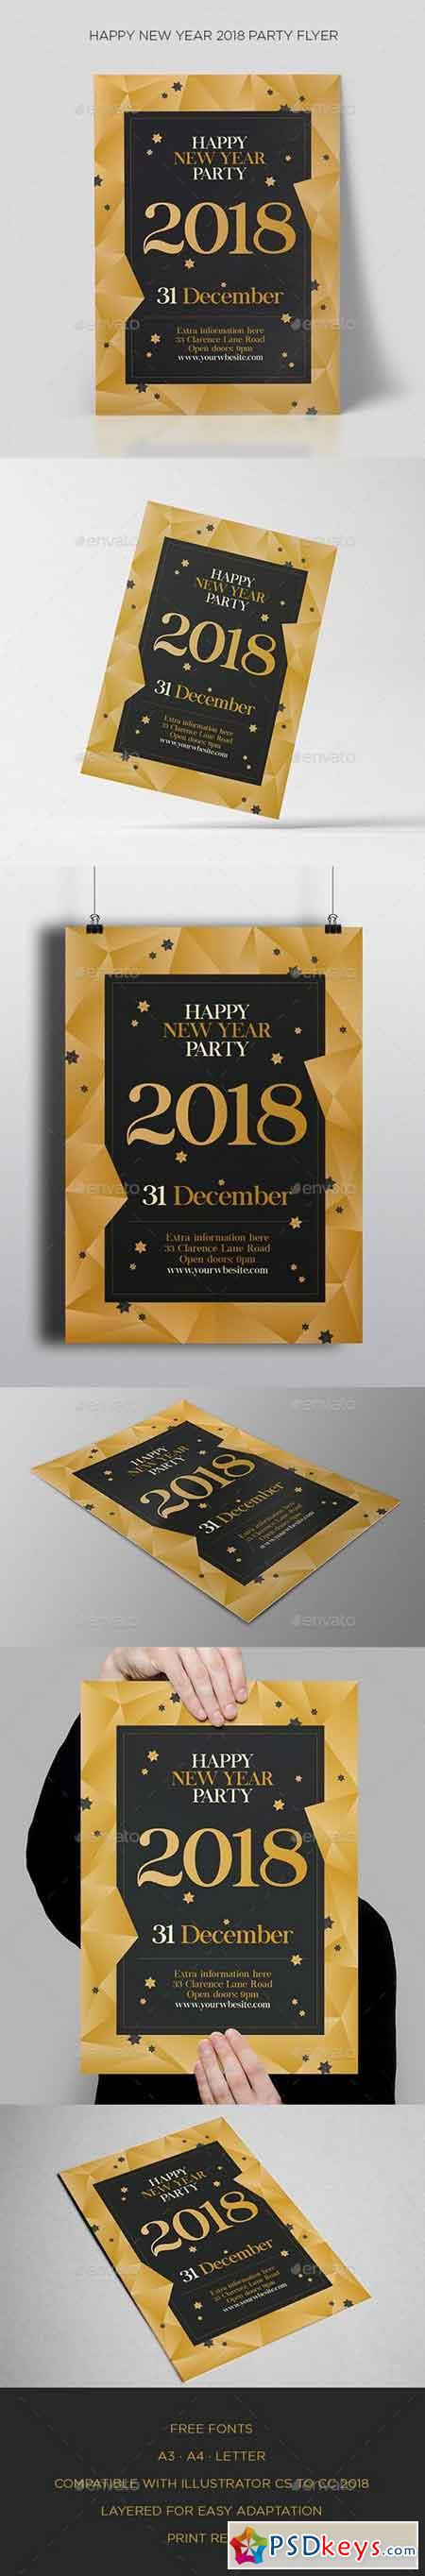 Happy New Year 2018 Party Flyer 21090650